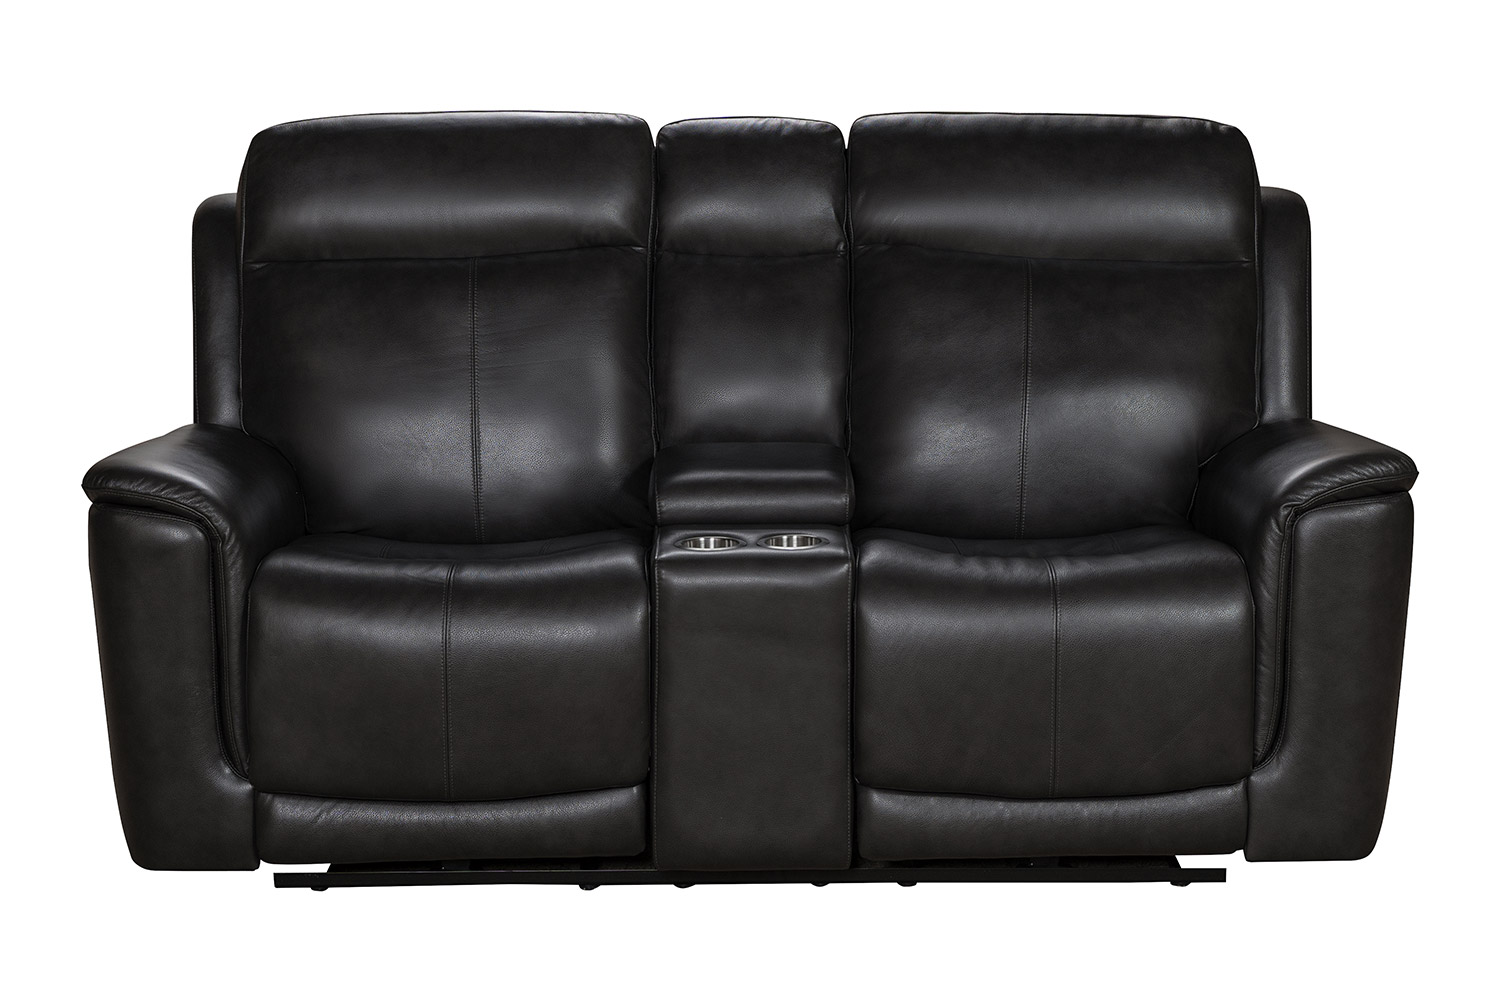 Barcalounger Burbank Power Reclining Console Loveseat with Power Head Rests and Lumbar - Matteo Smokey Gray/Leather match